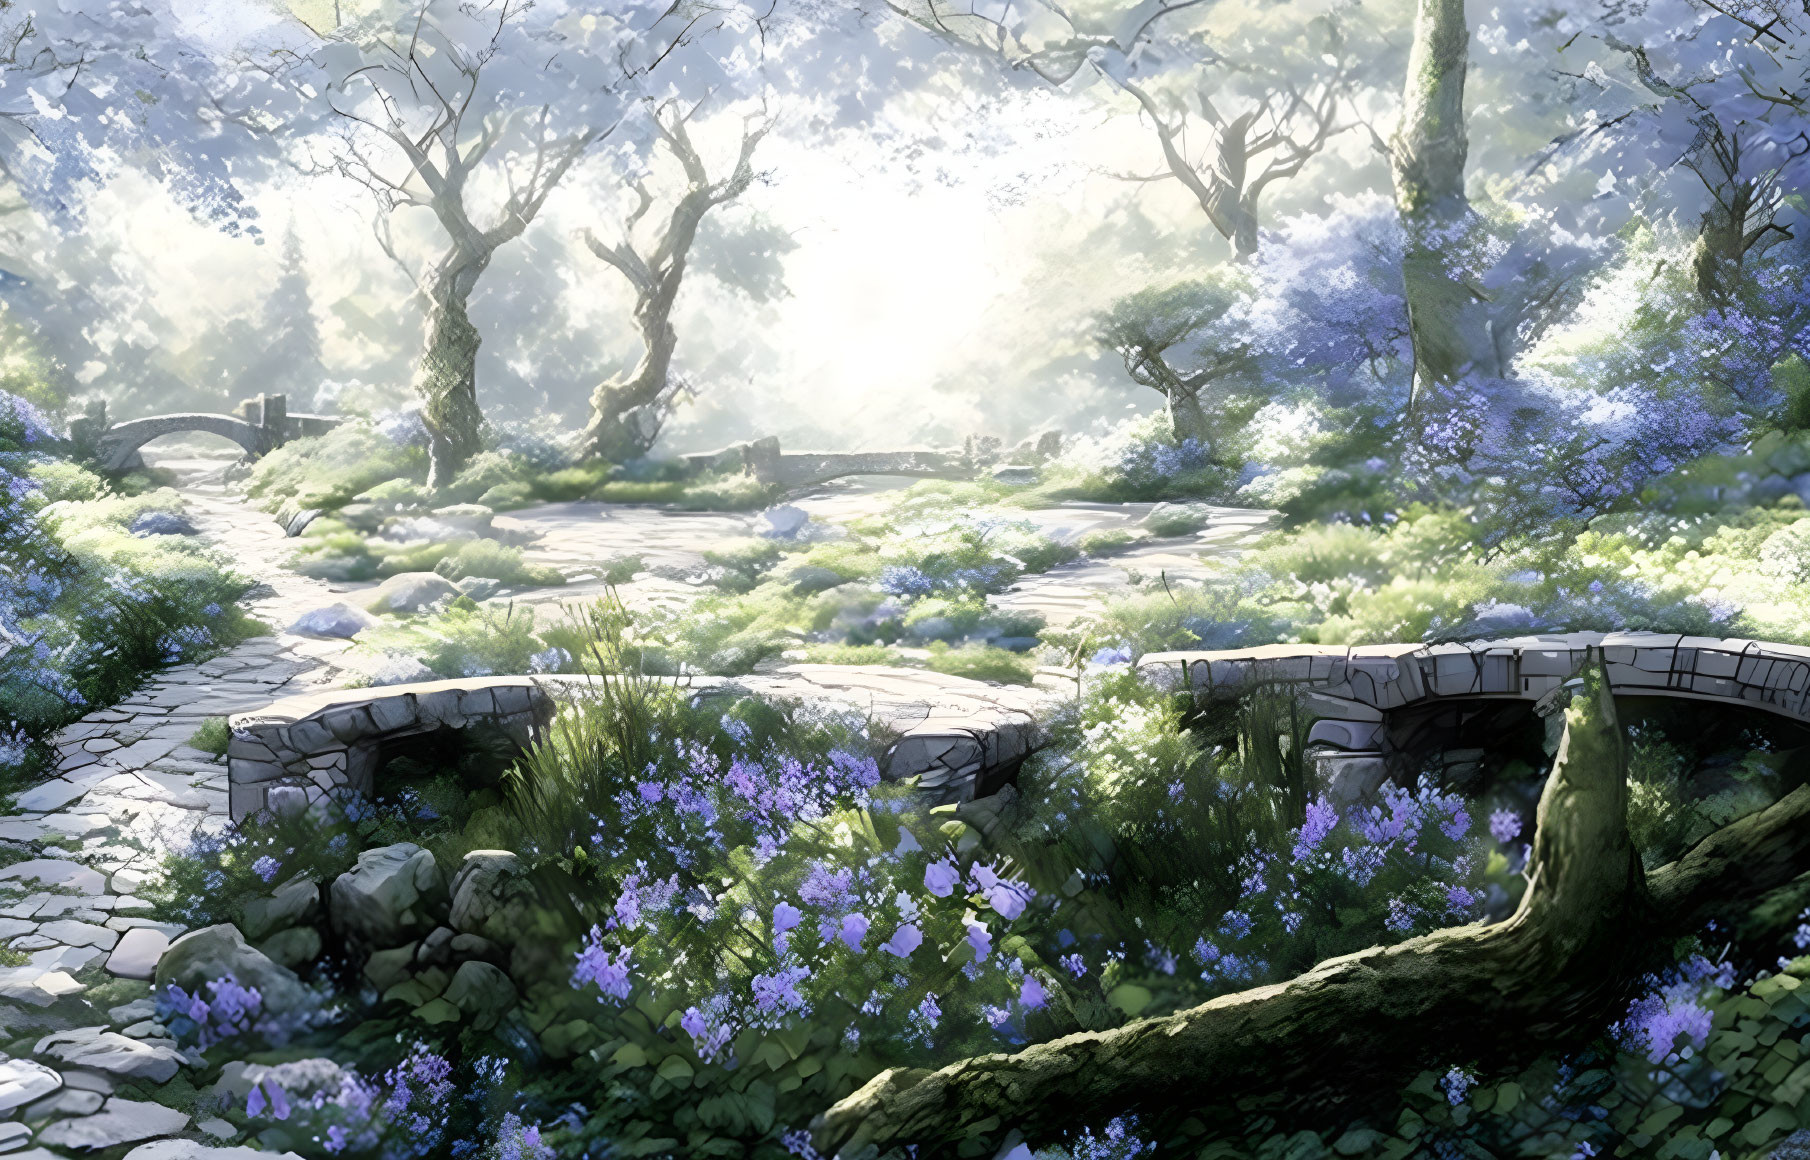 Tranquil forest scene with sunlight, stone path, bridges, and blue flowers